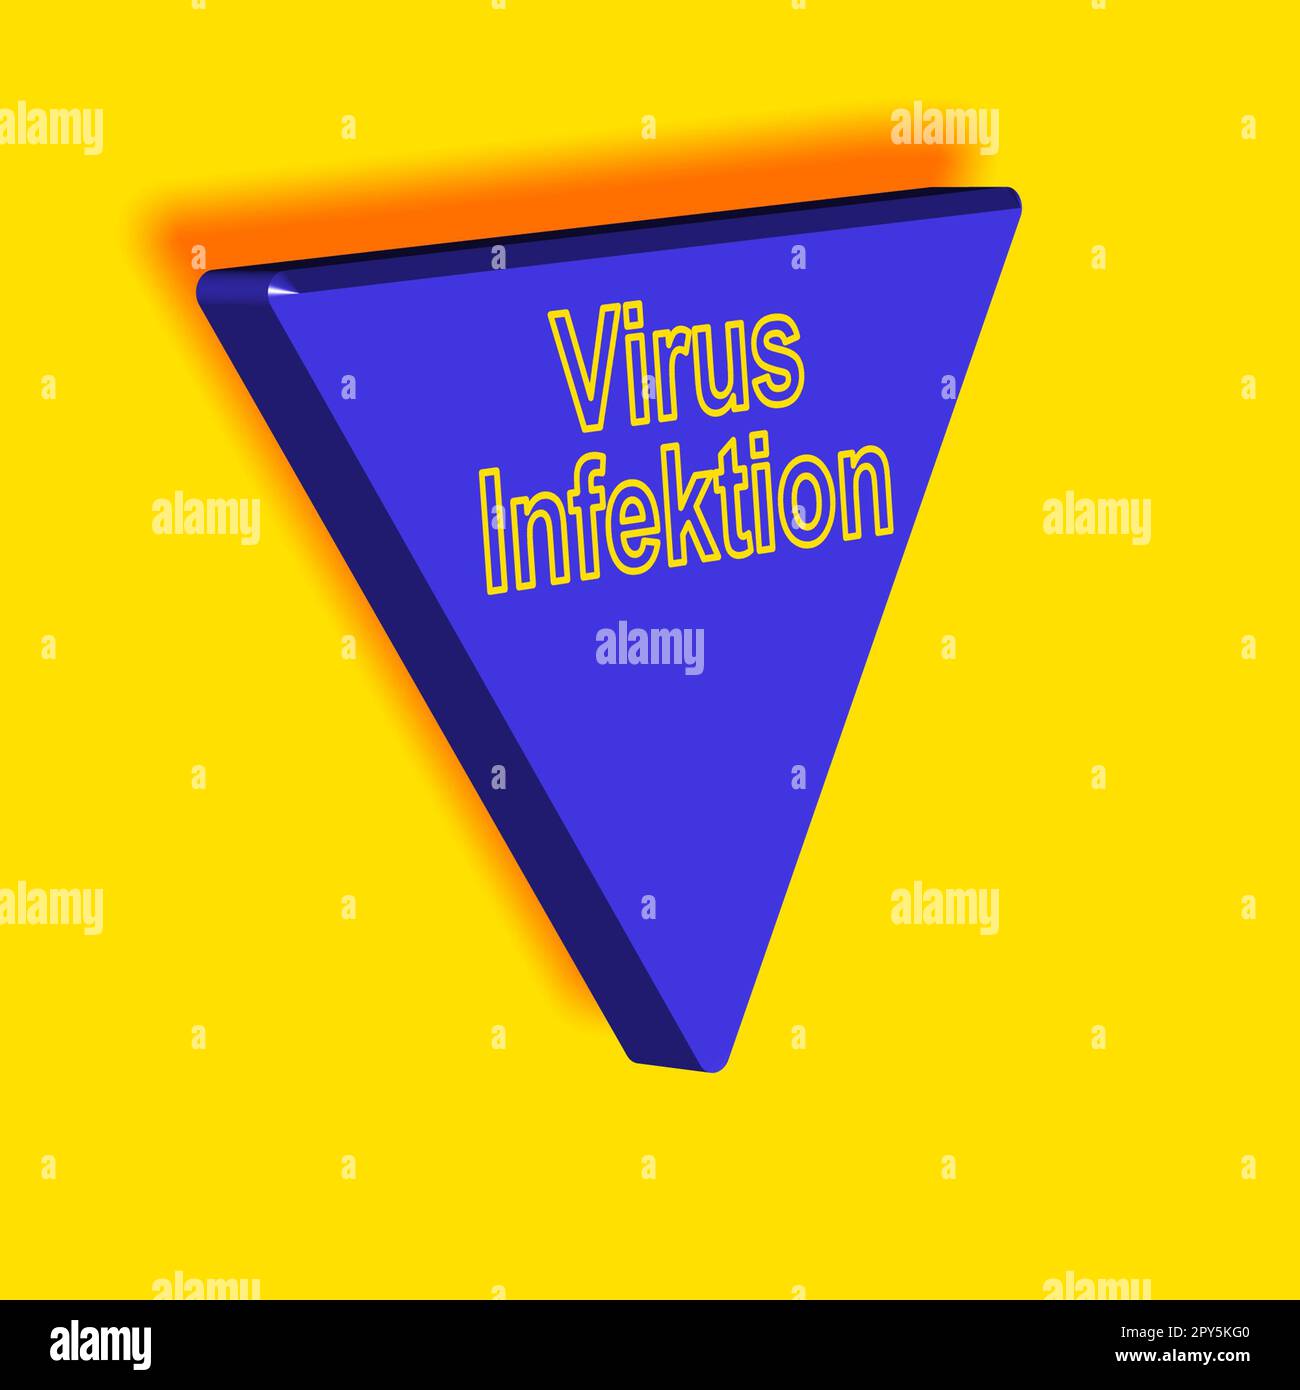 'Virusinfektion' = 'Virus infection' - word, lettering or text as a 3D illustration, 3D rendering, computer graphics Stock Photo